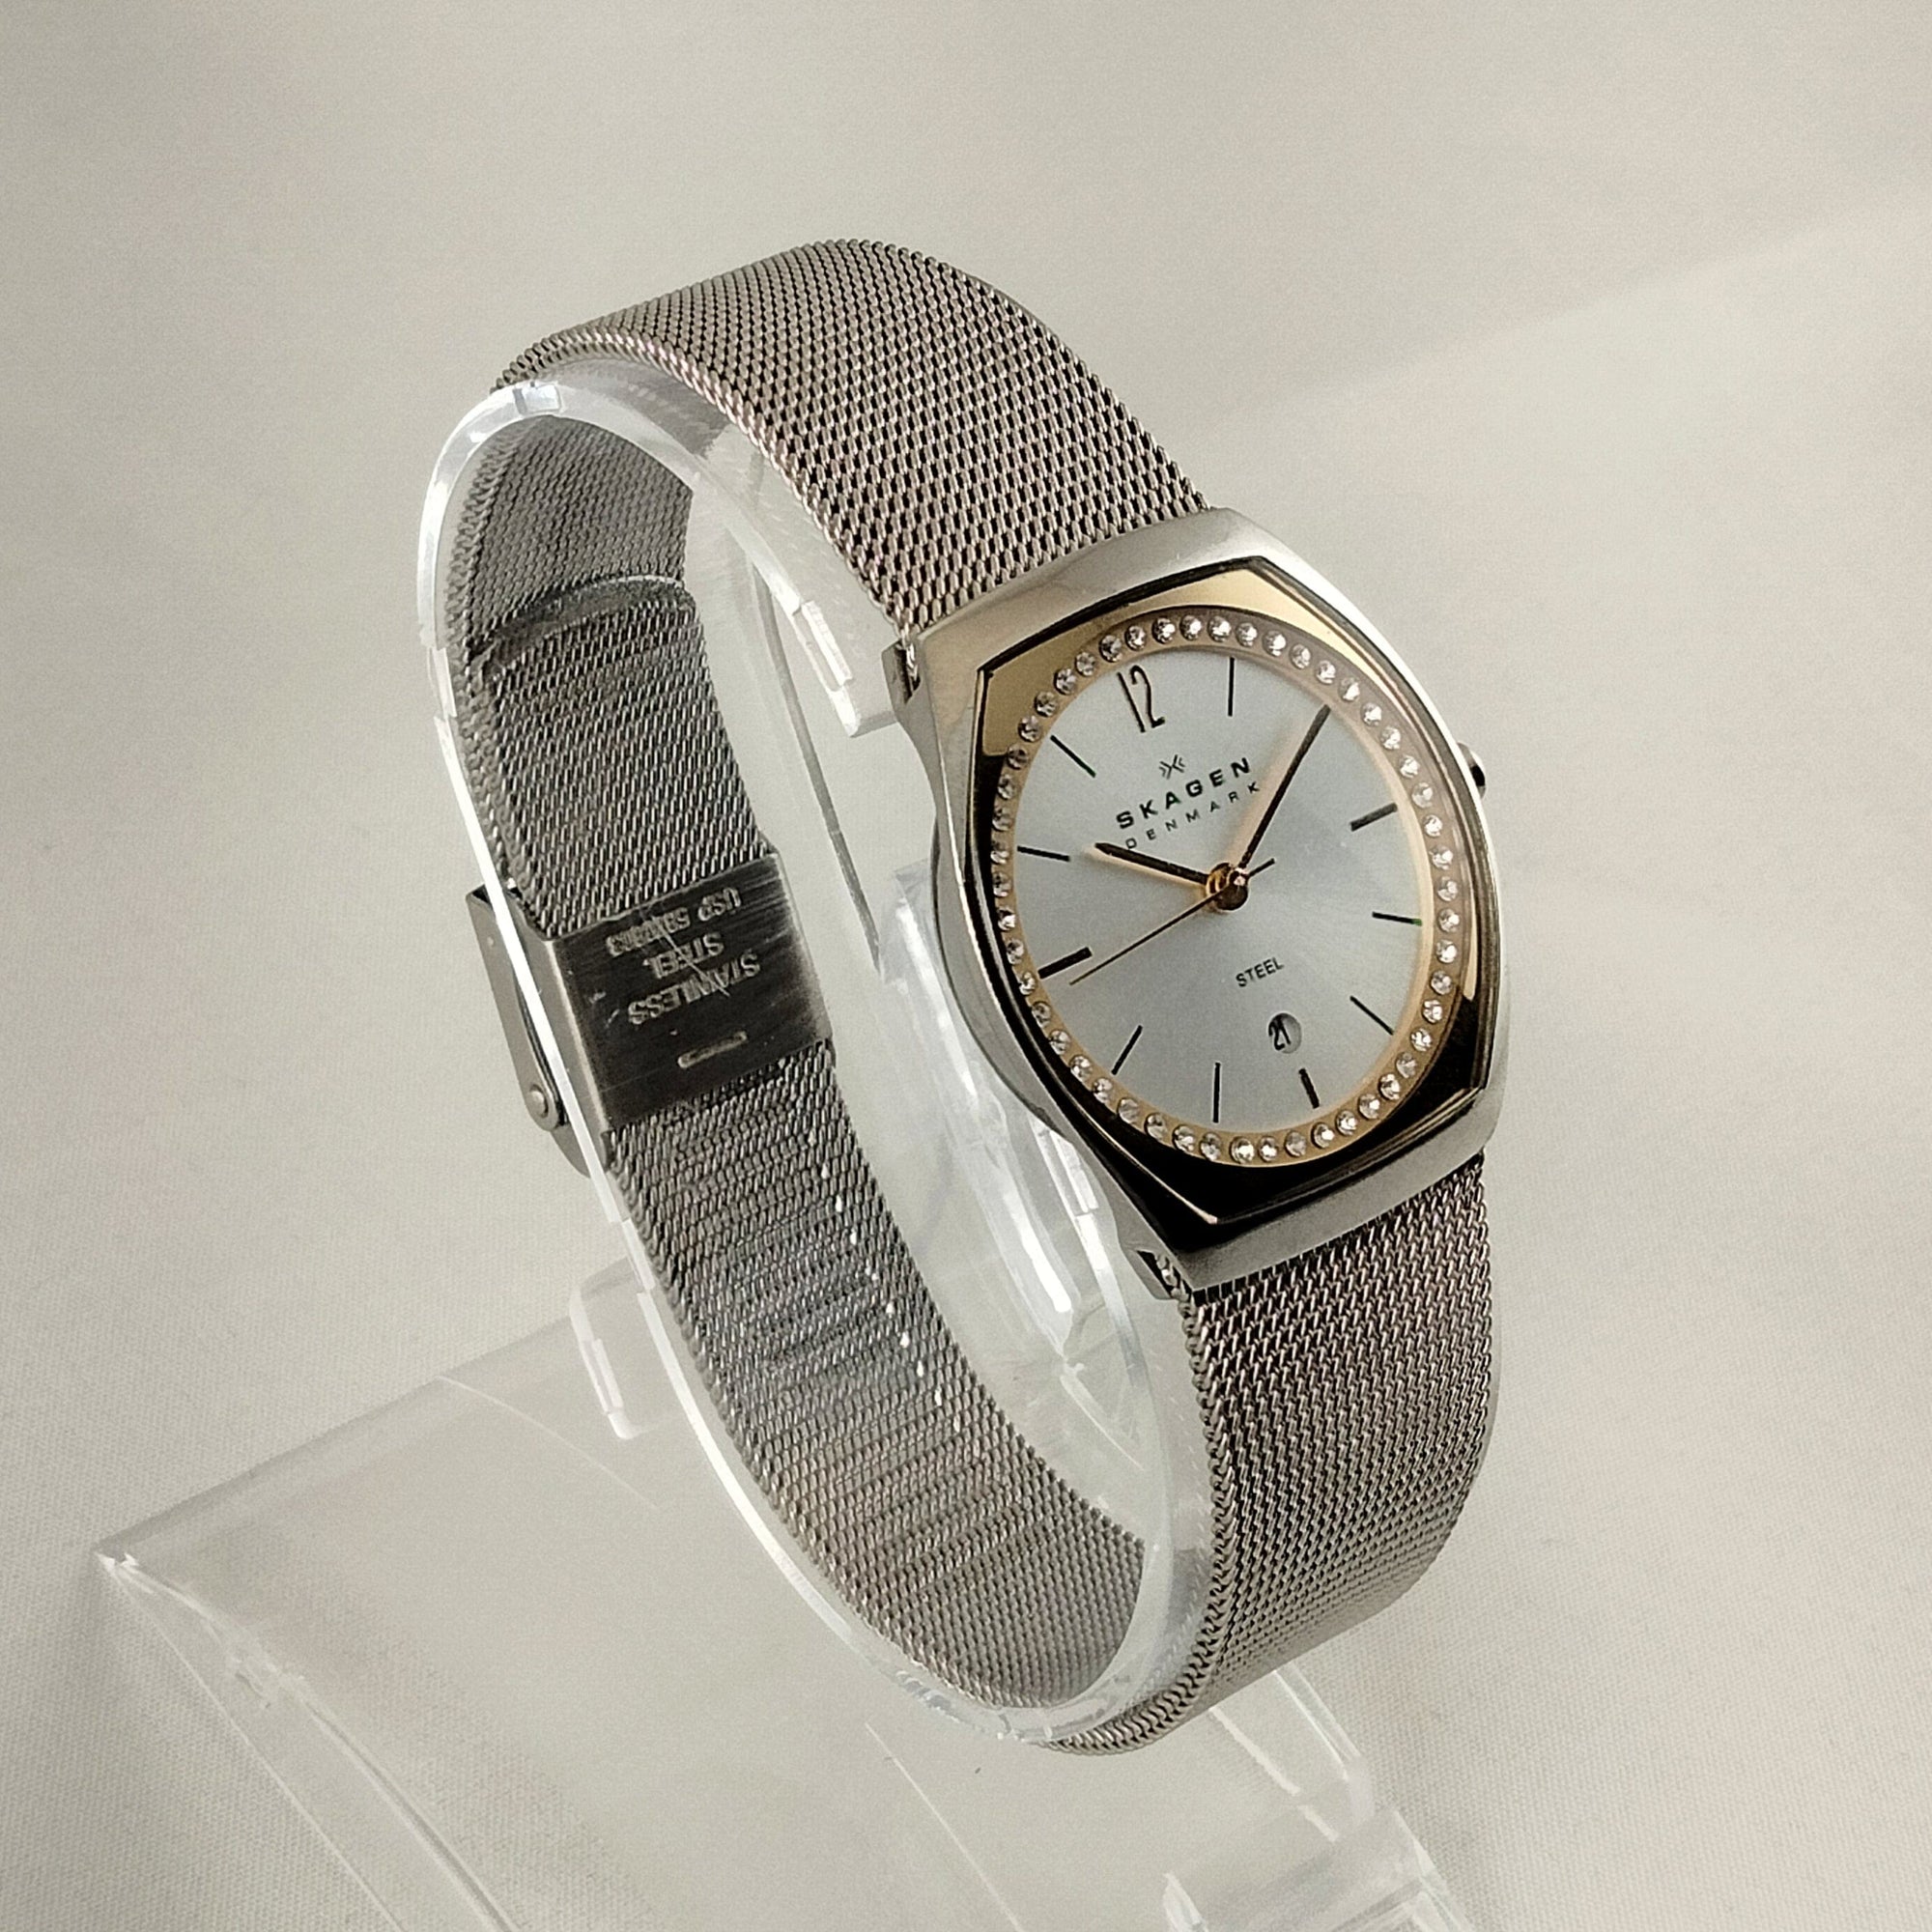 I Like Mikes Mid Century Modern Watches Skagen Women's Stainless Steel Watch, Jewel Framed Face, Mesh Strap